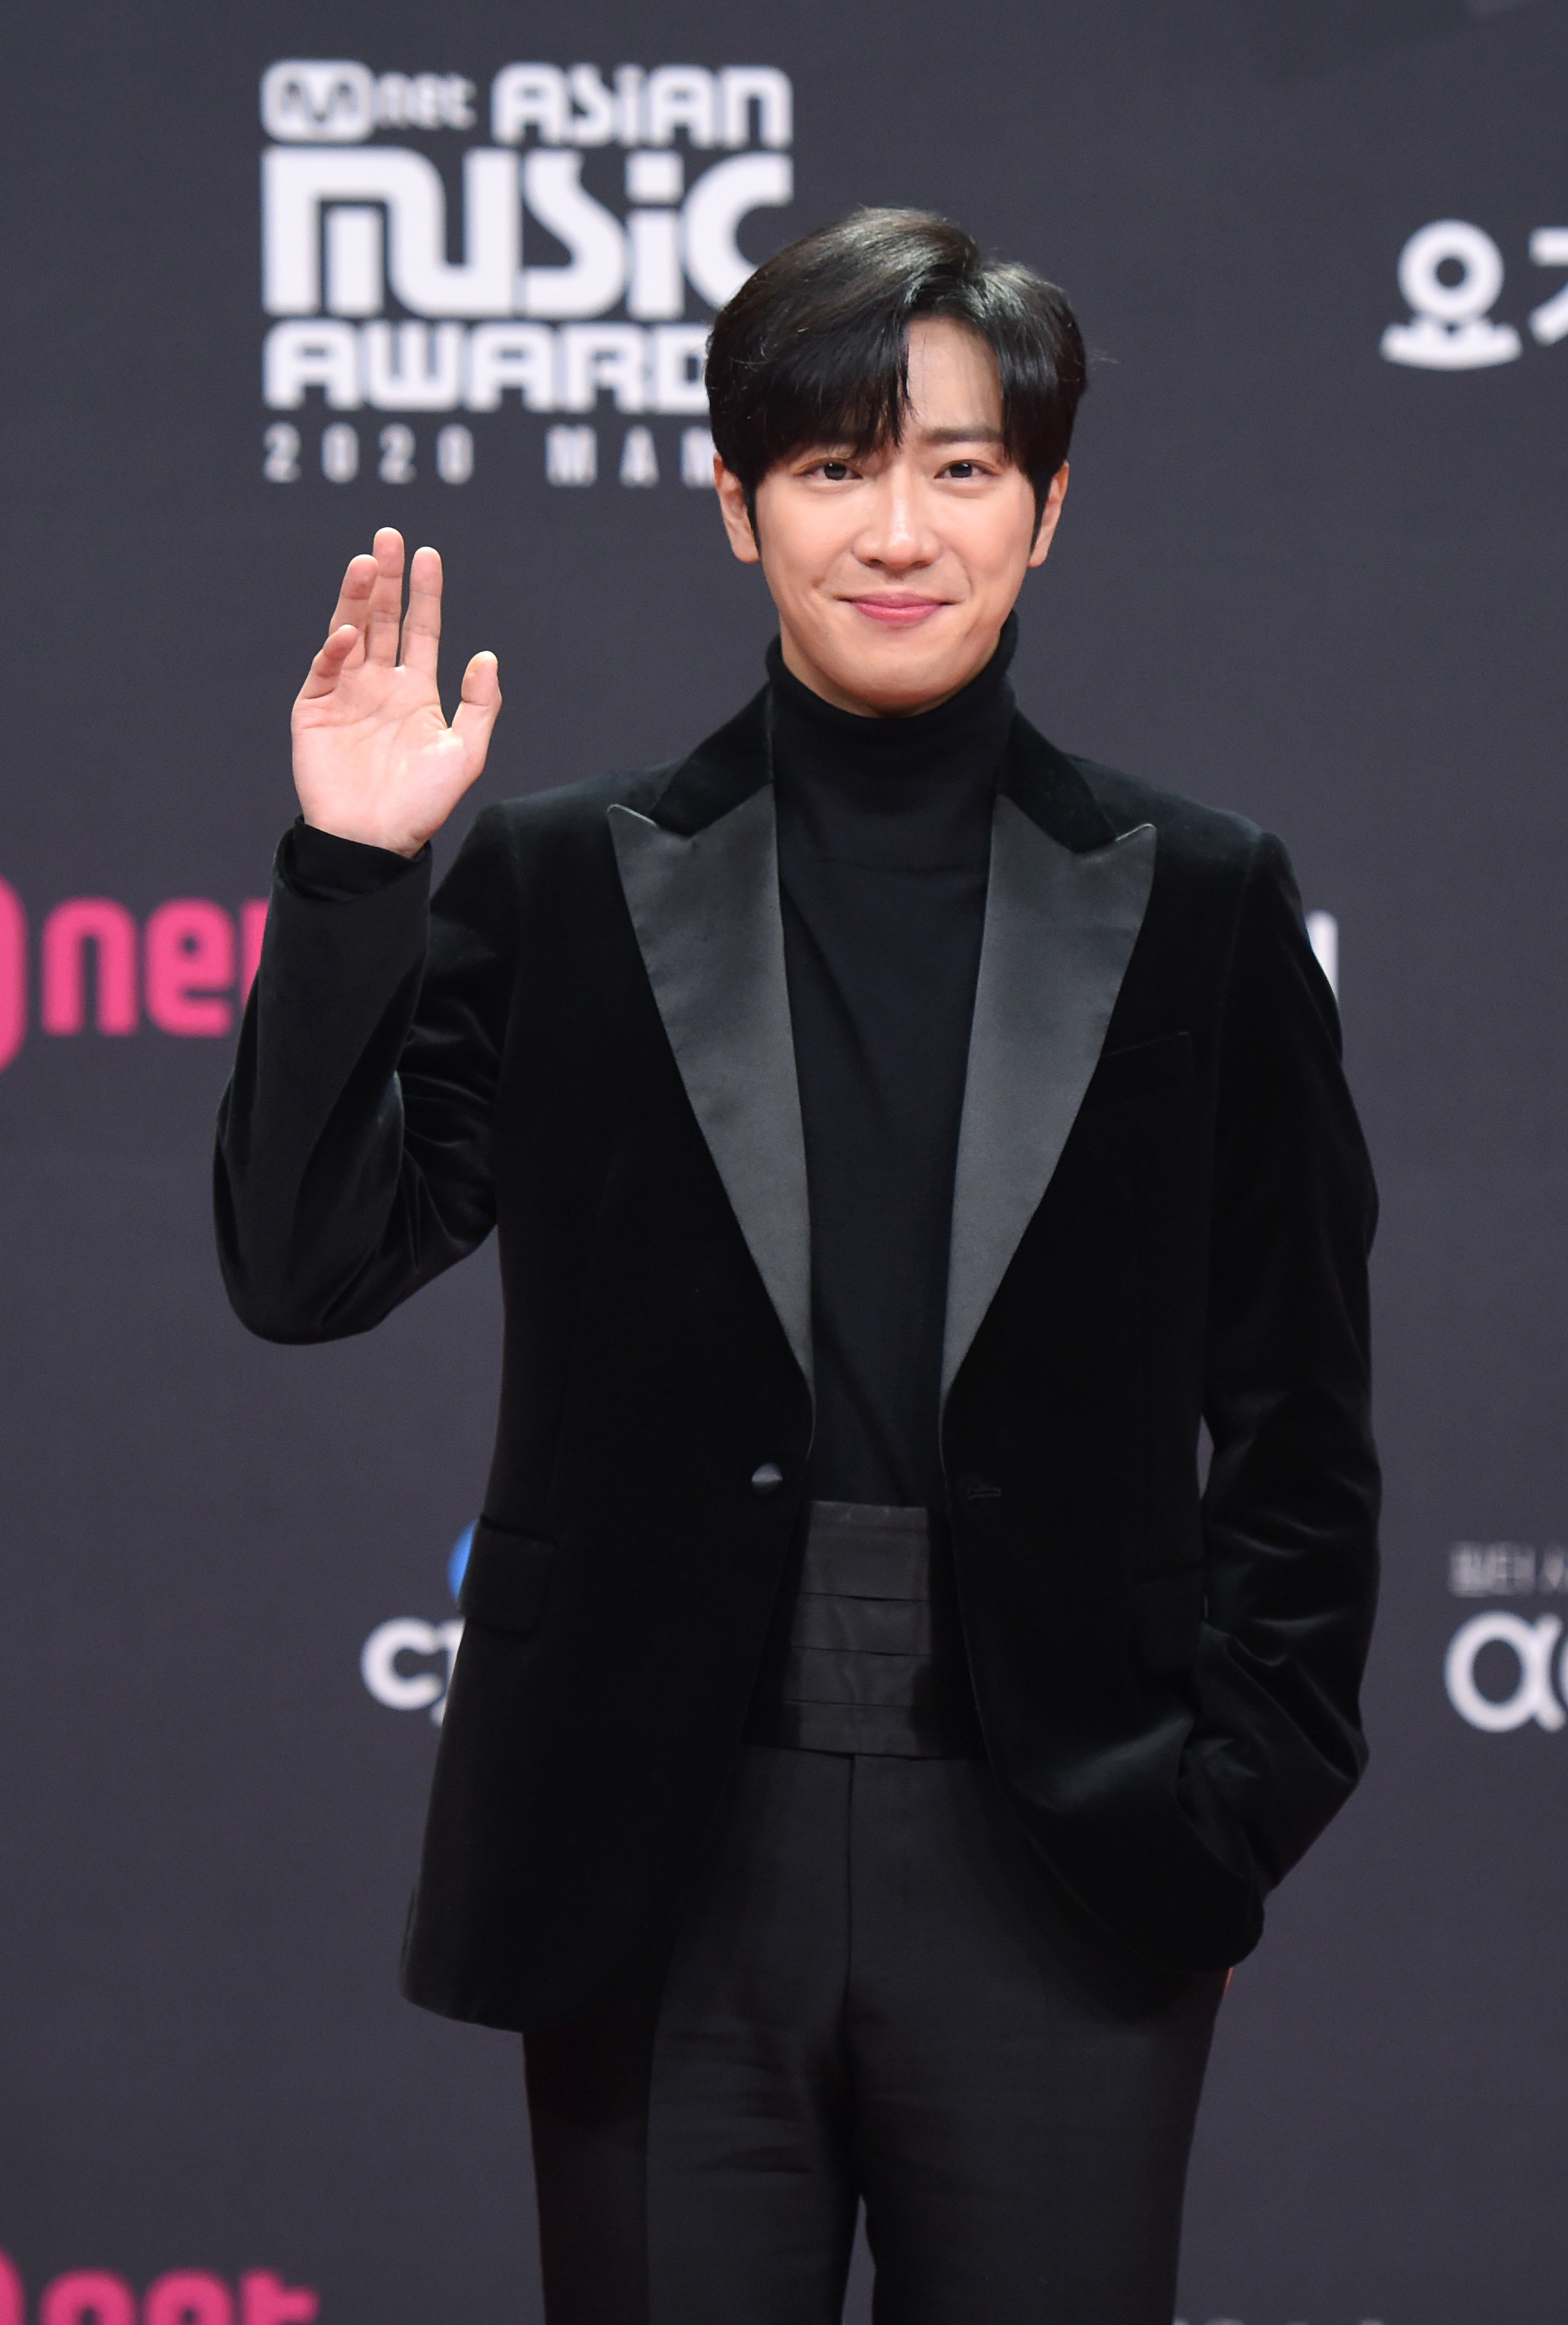 Lee Sang Yeob wears a black suit with a turtleneck underneath at the 2020 Mnet Asian Music Awards